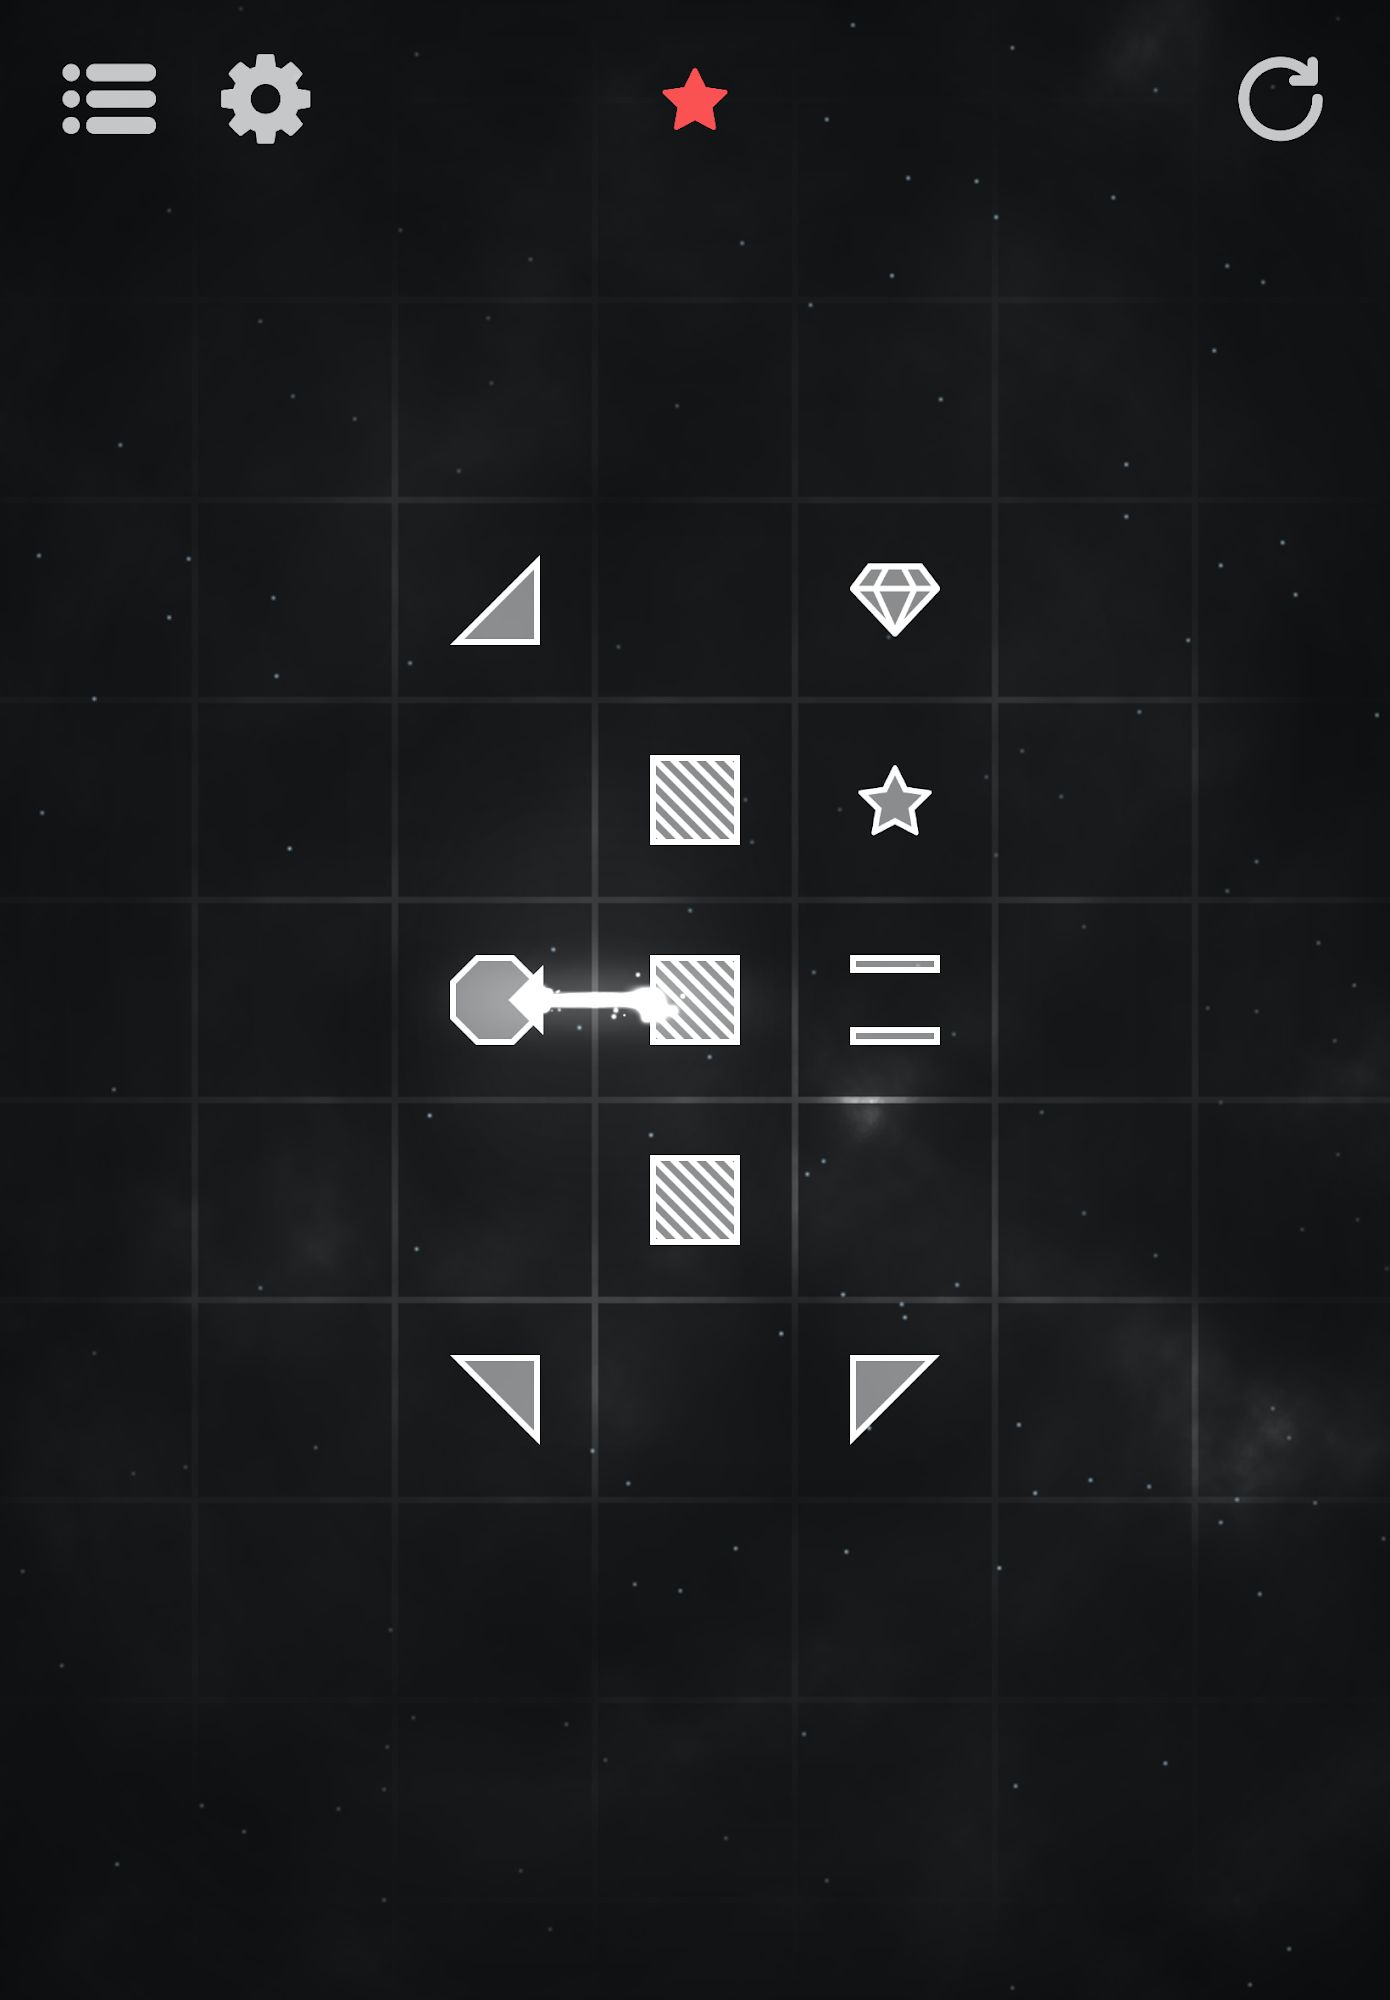 PuzzLight - Puzzle Game - Android game screenshots.